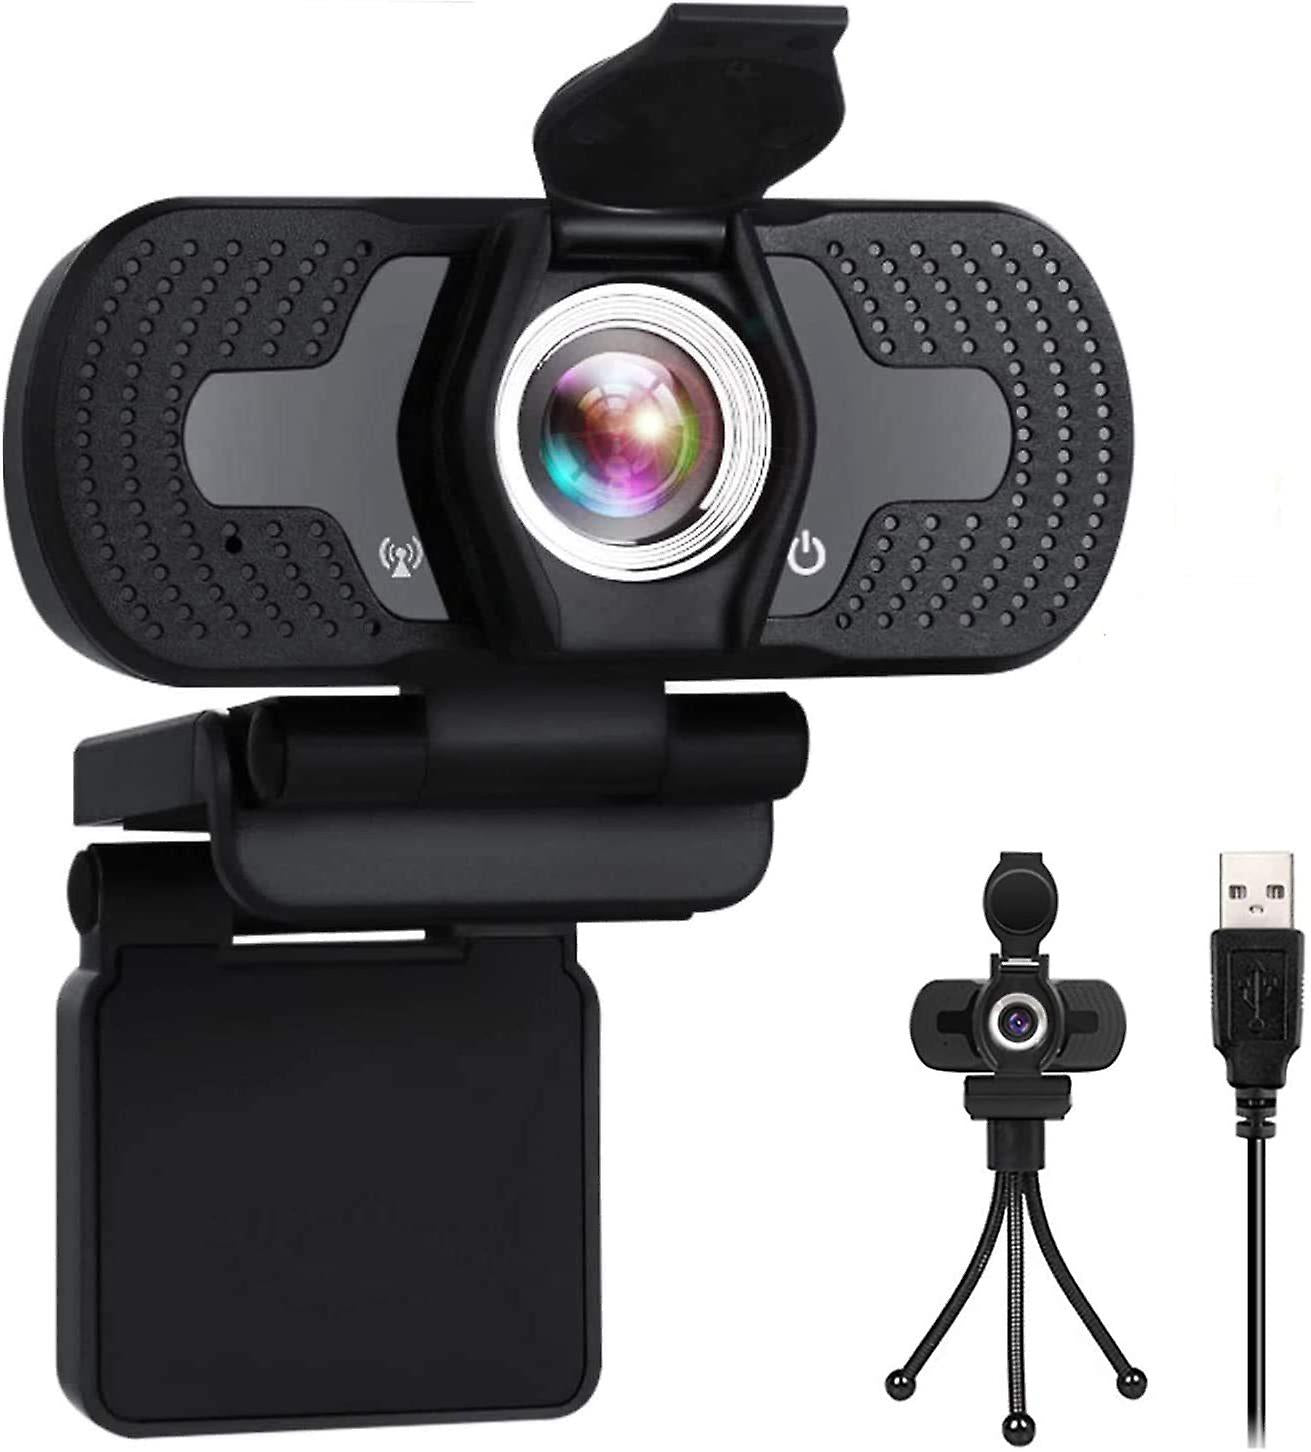 LarmTek W2 FHD 1080p 30fps USB 2.0 Webcam with Built-In Noise Cancelling Analog Microphone and Attachable Privacy Shutter for Vlogging and Video Calls (Flexible 1/4" Bolt Mount Flexible Mini Tripod Included)